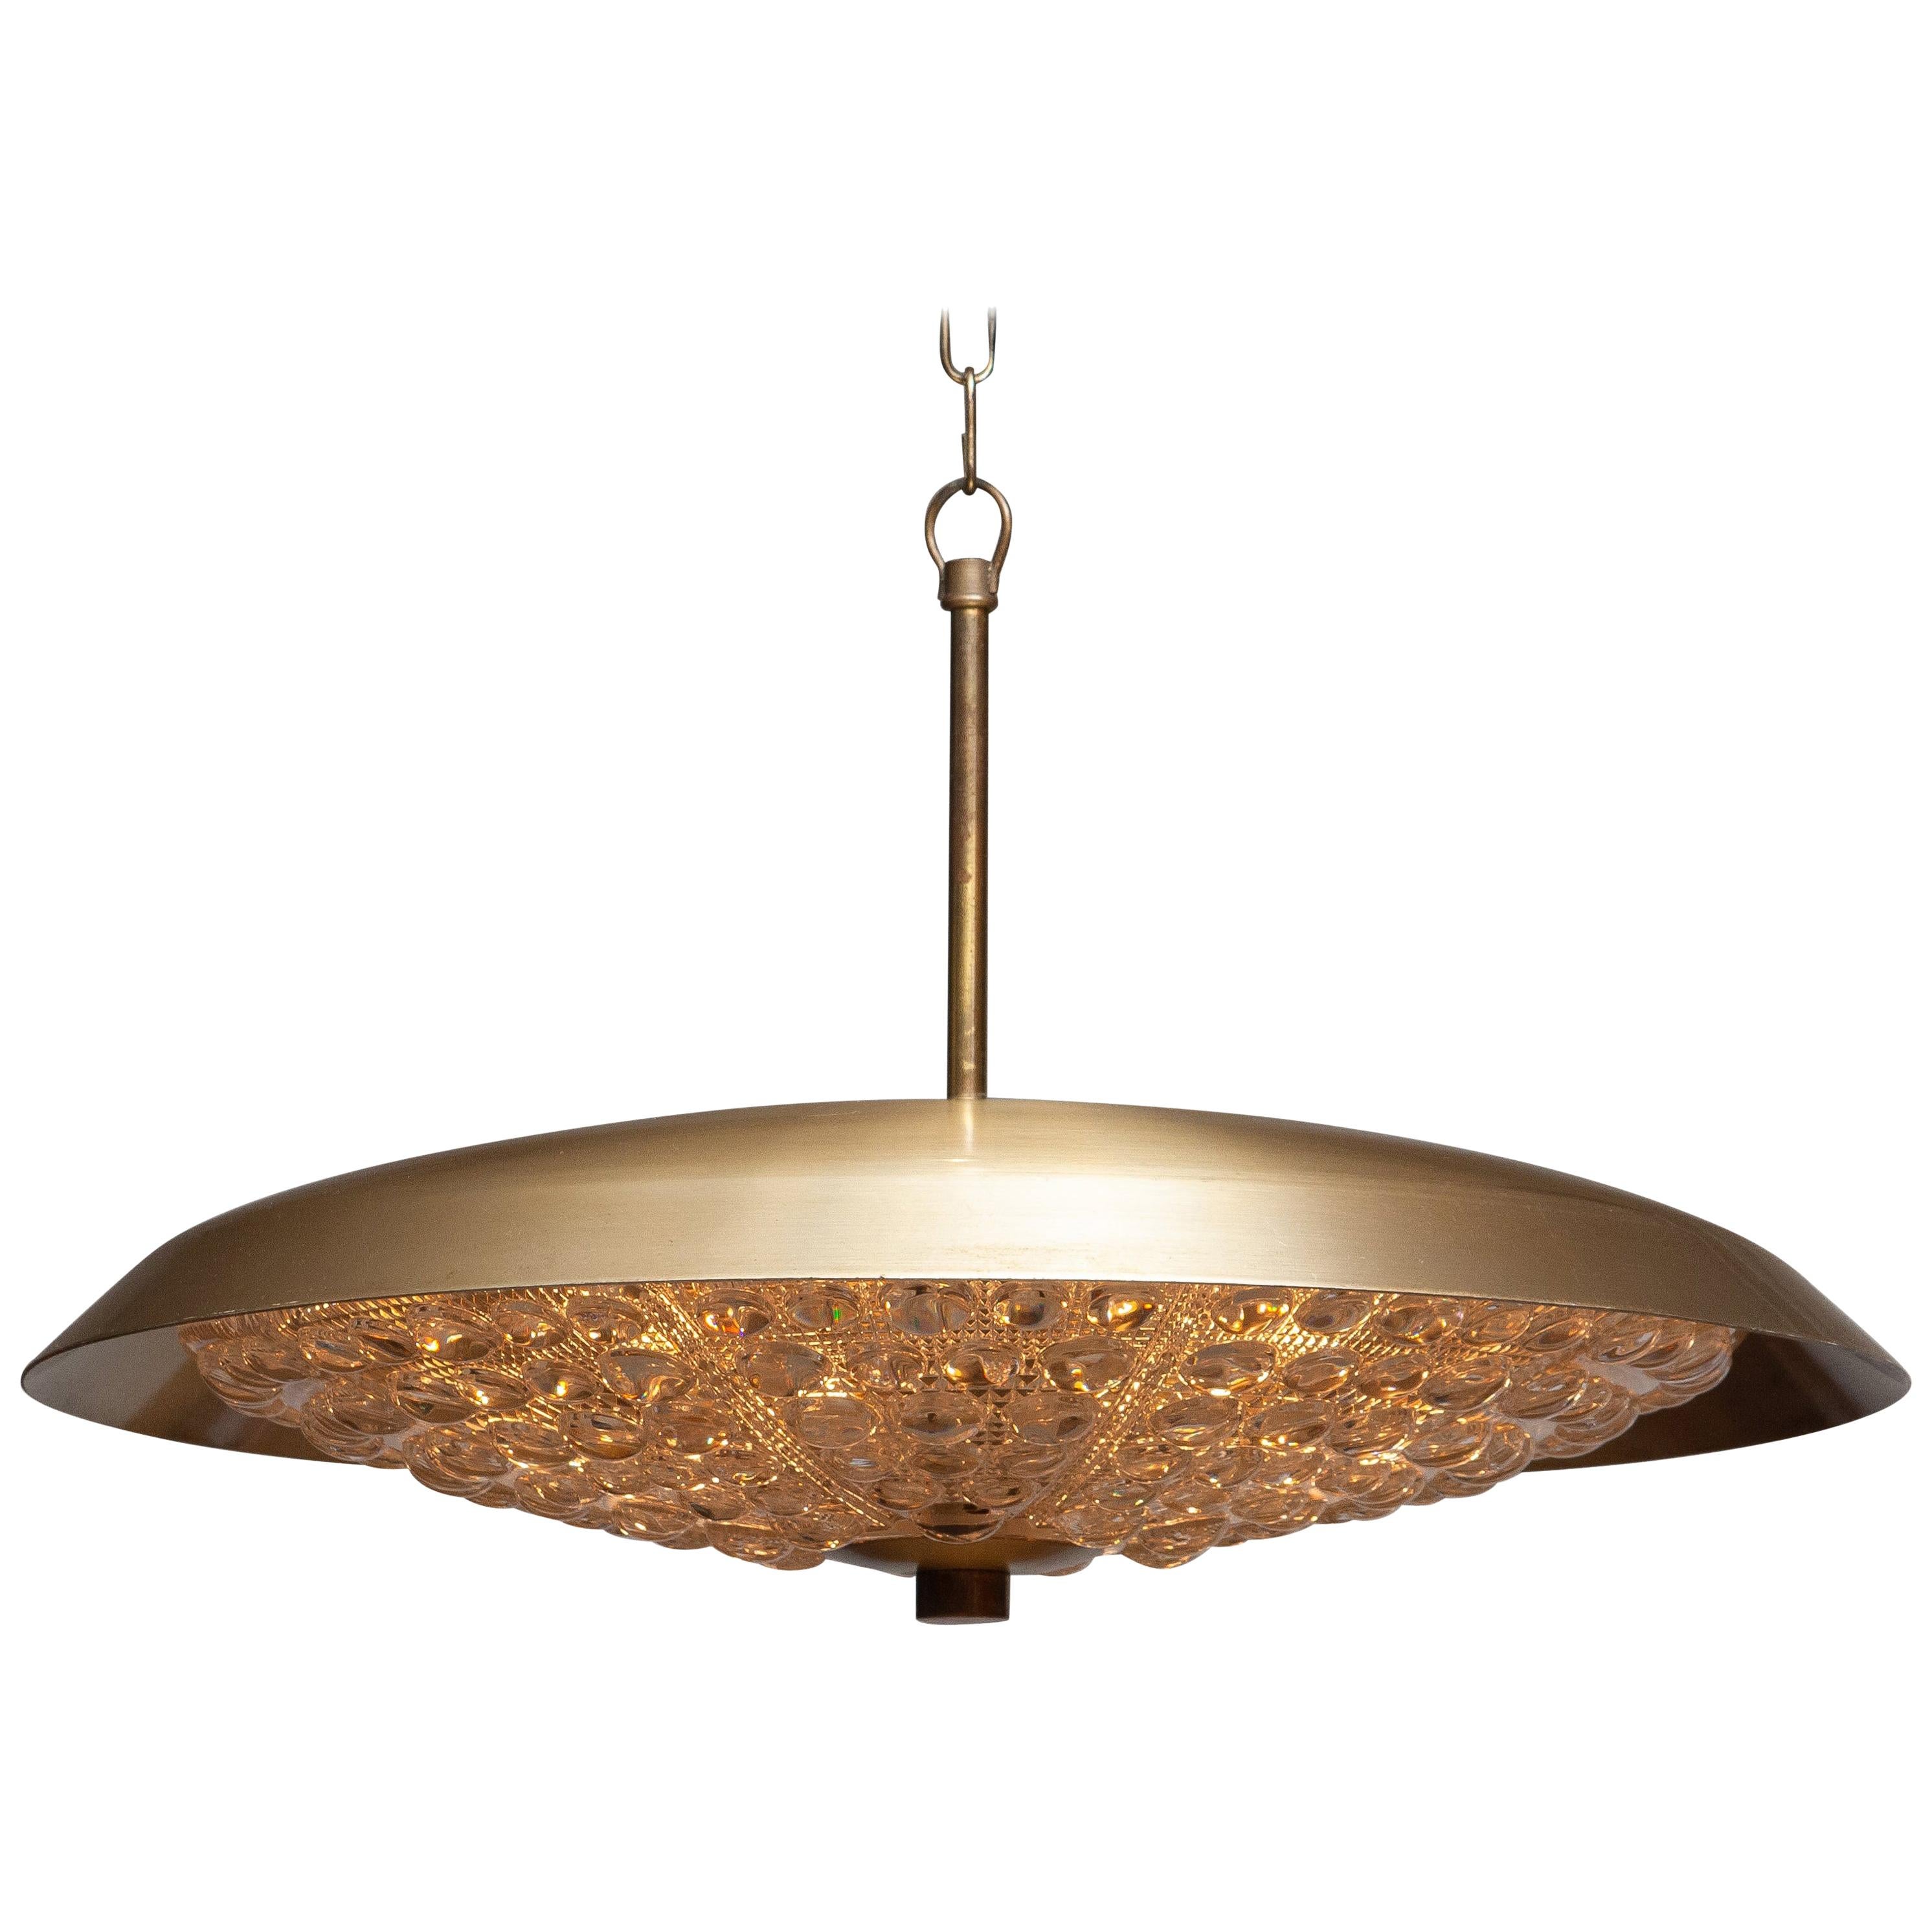 1950s, Brass and Glass Pendant Lamp Designed by Carl Fagerlund for Orrefors